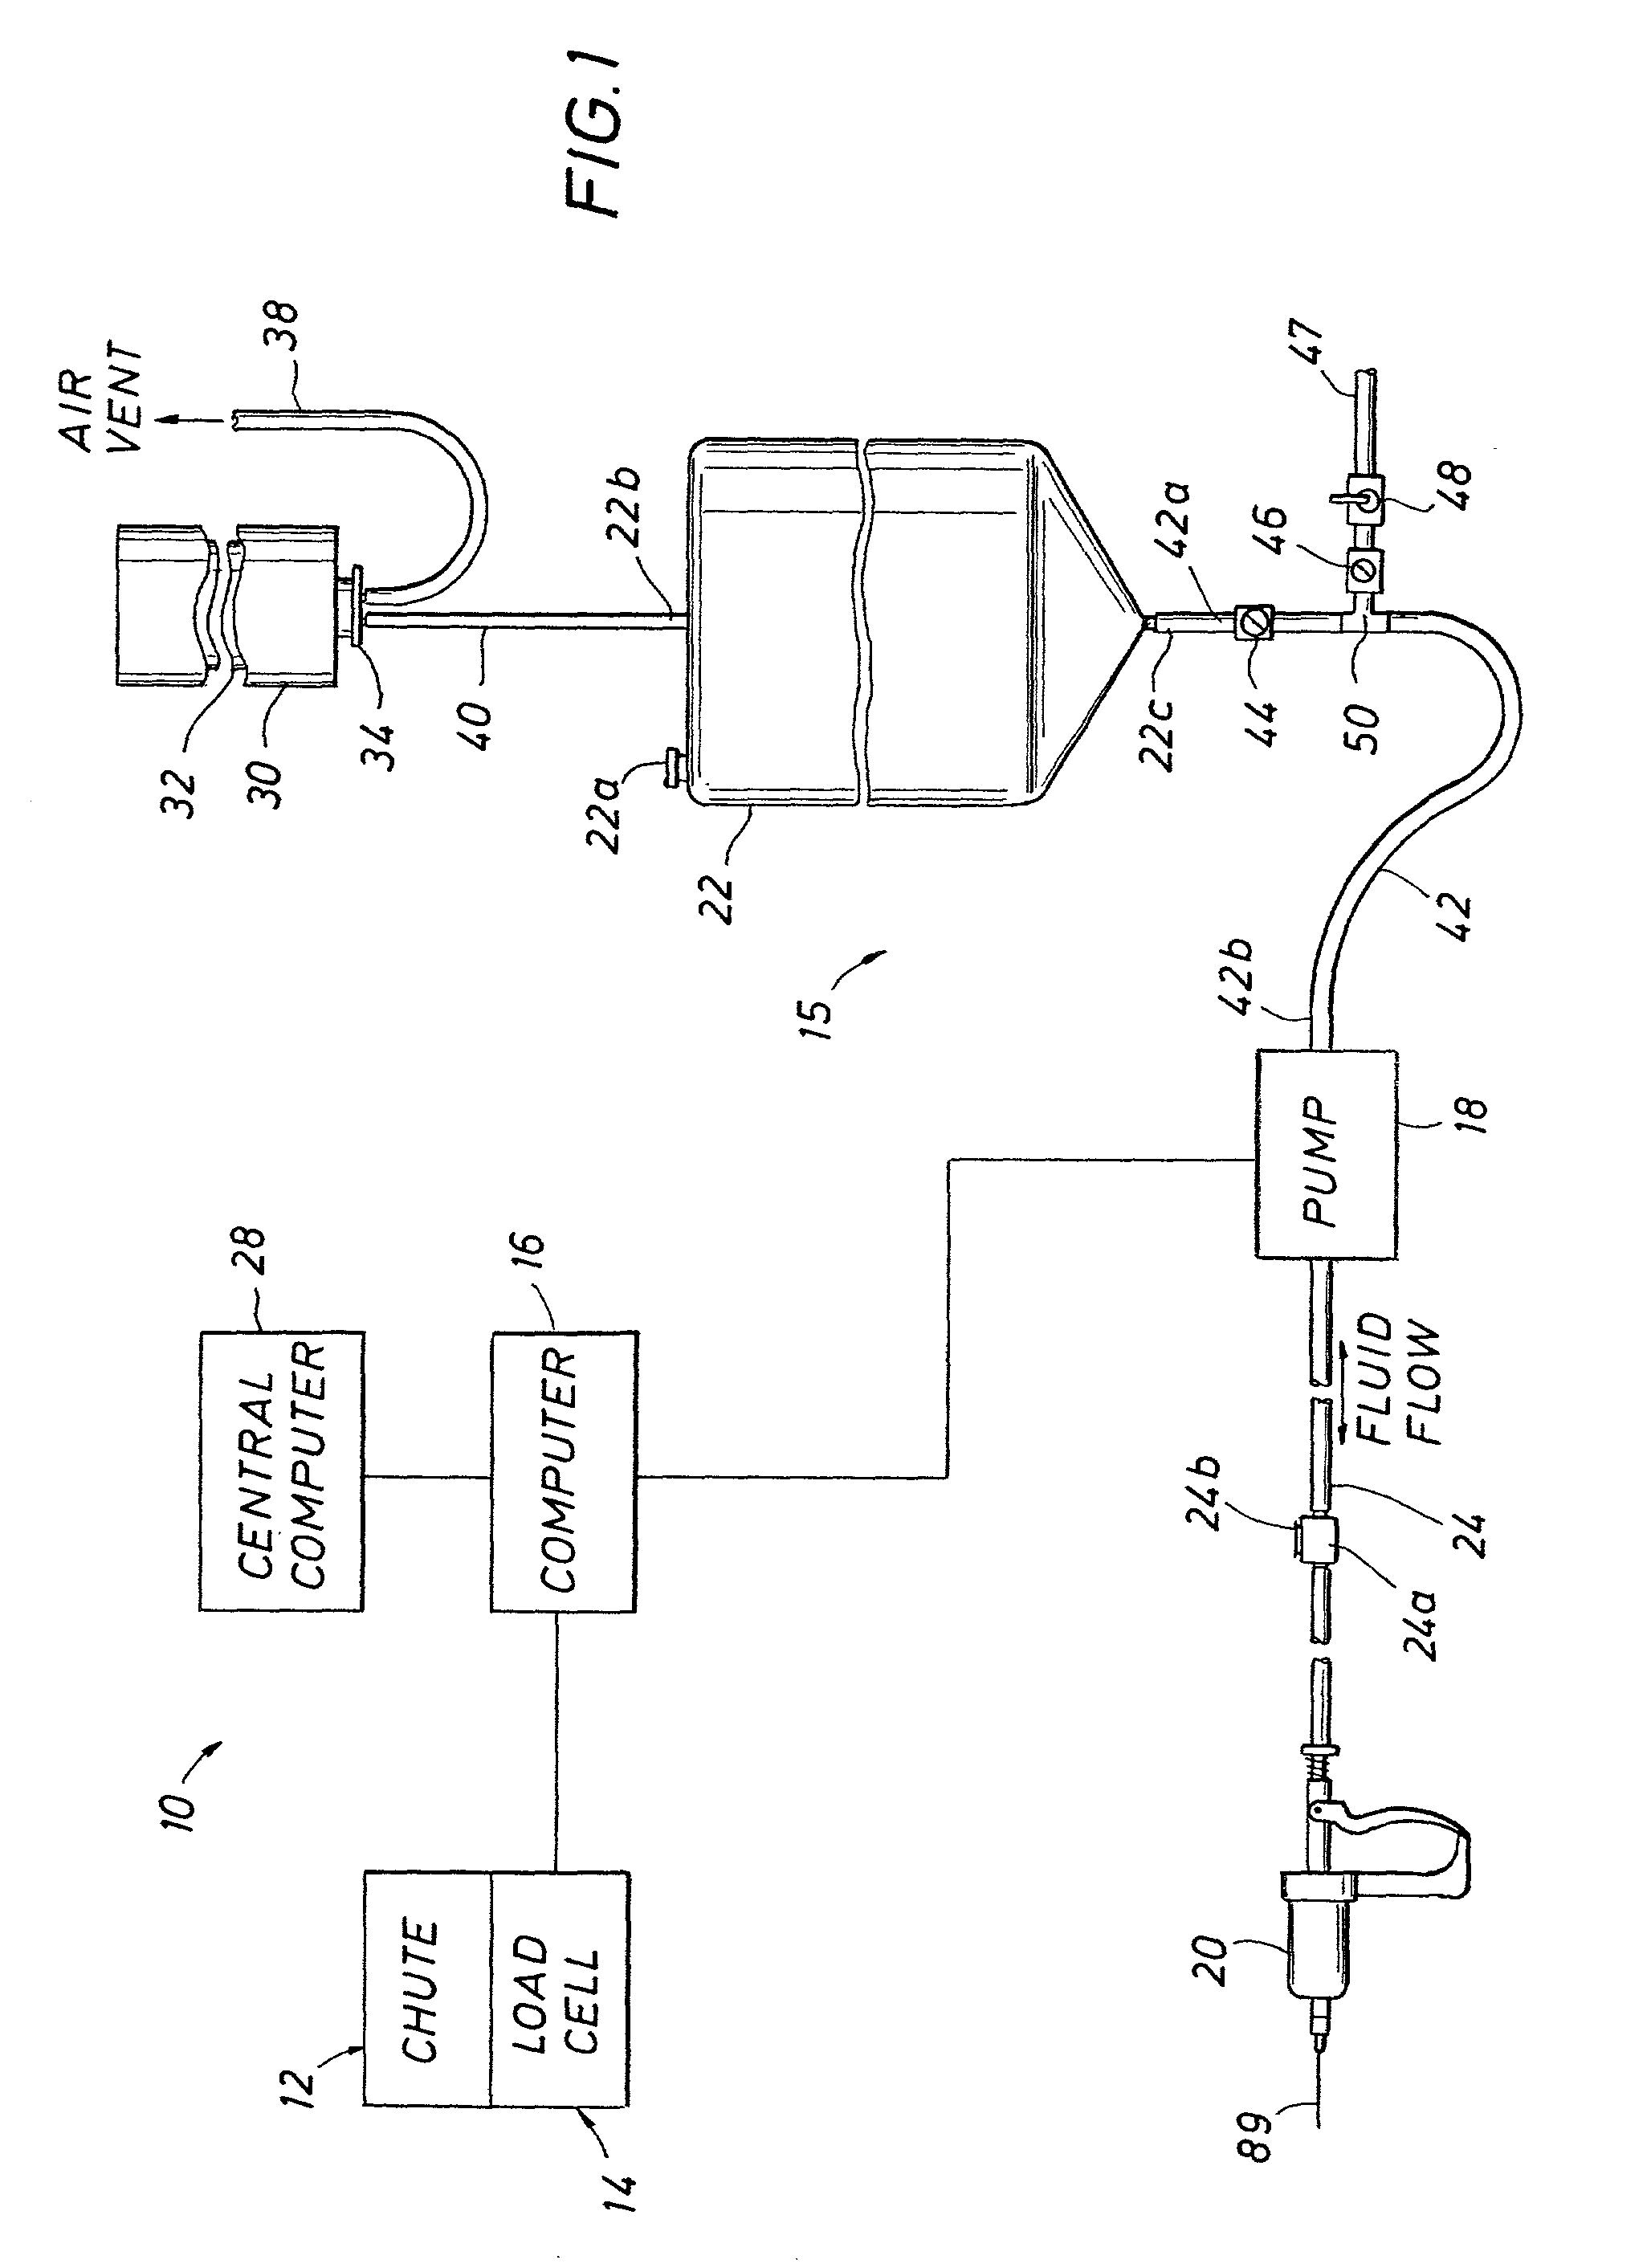 Weight dependent, automatic filling dosage system and method of using same